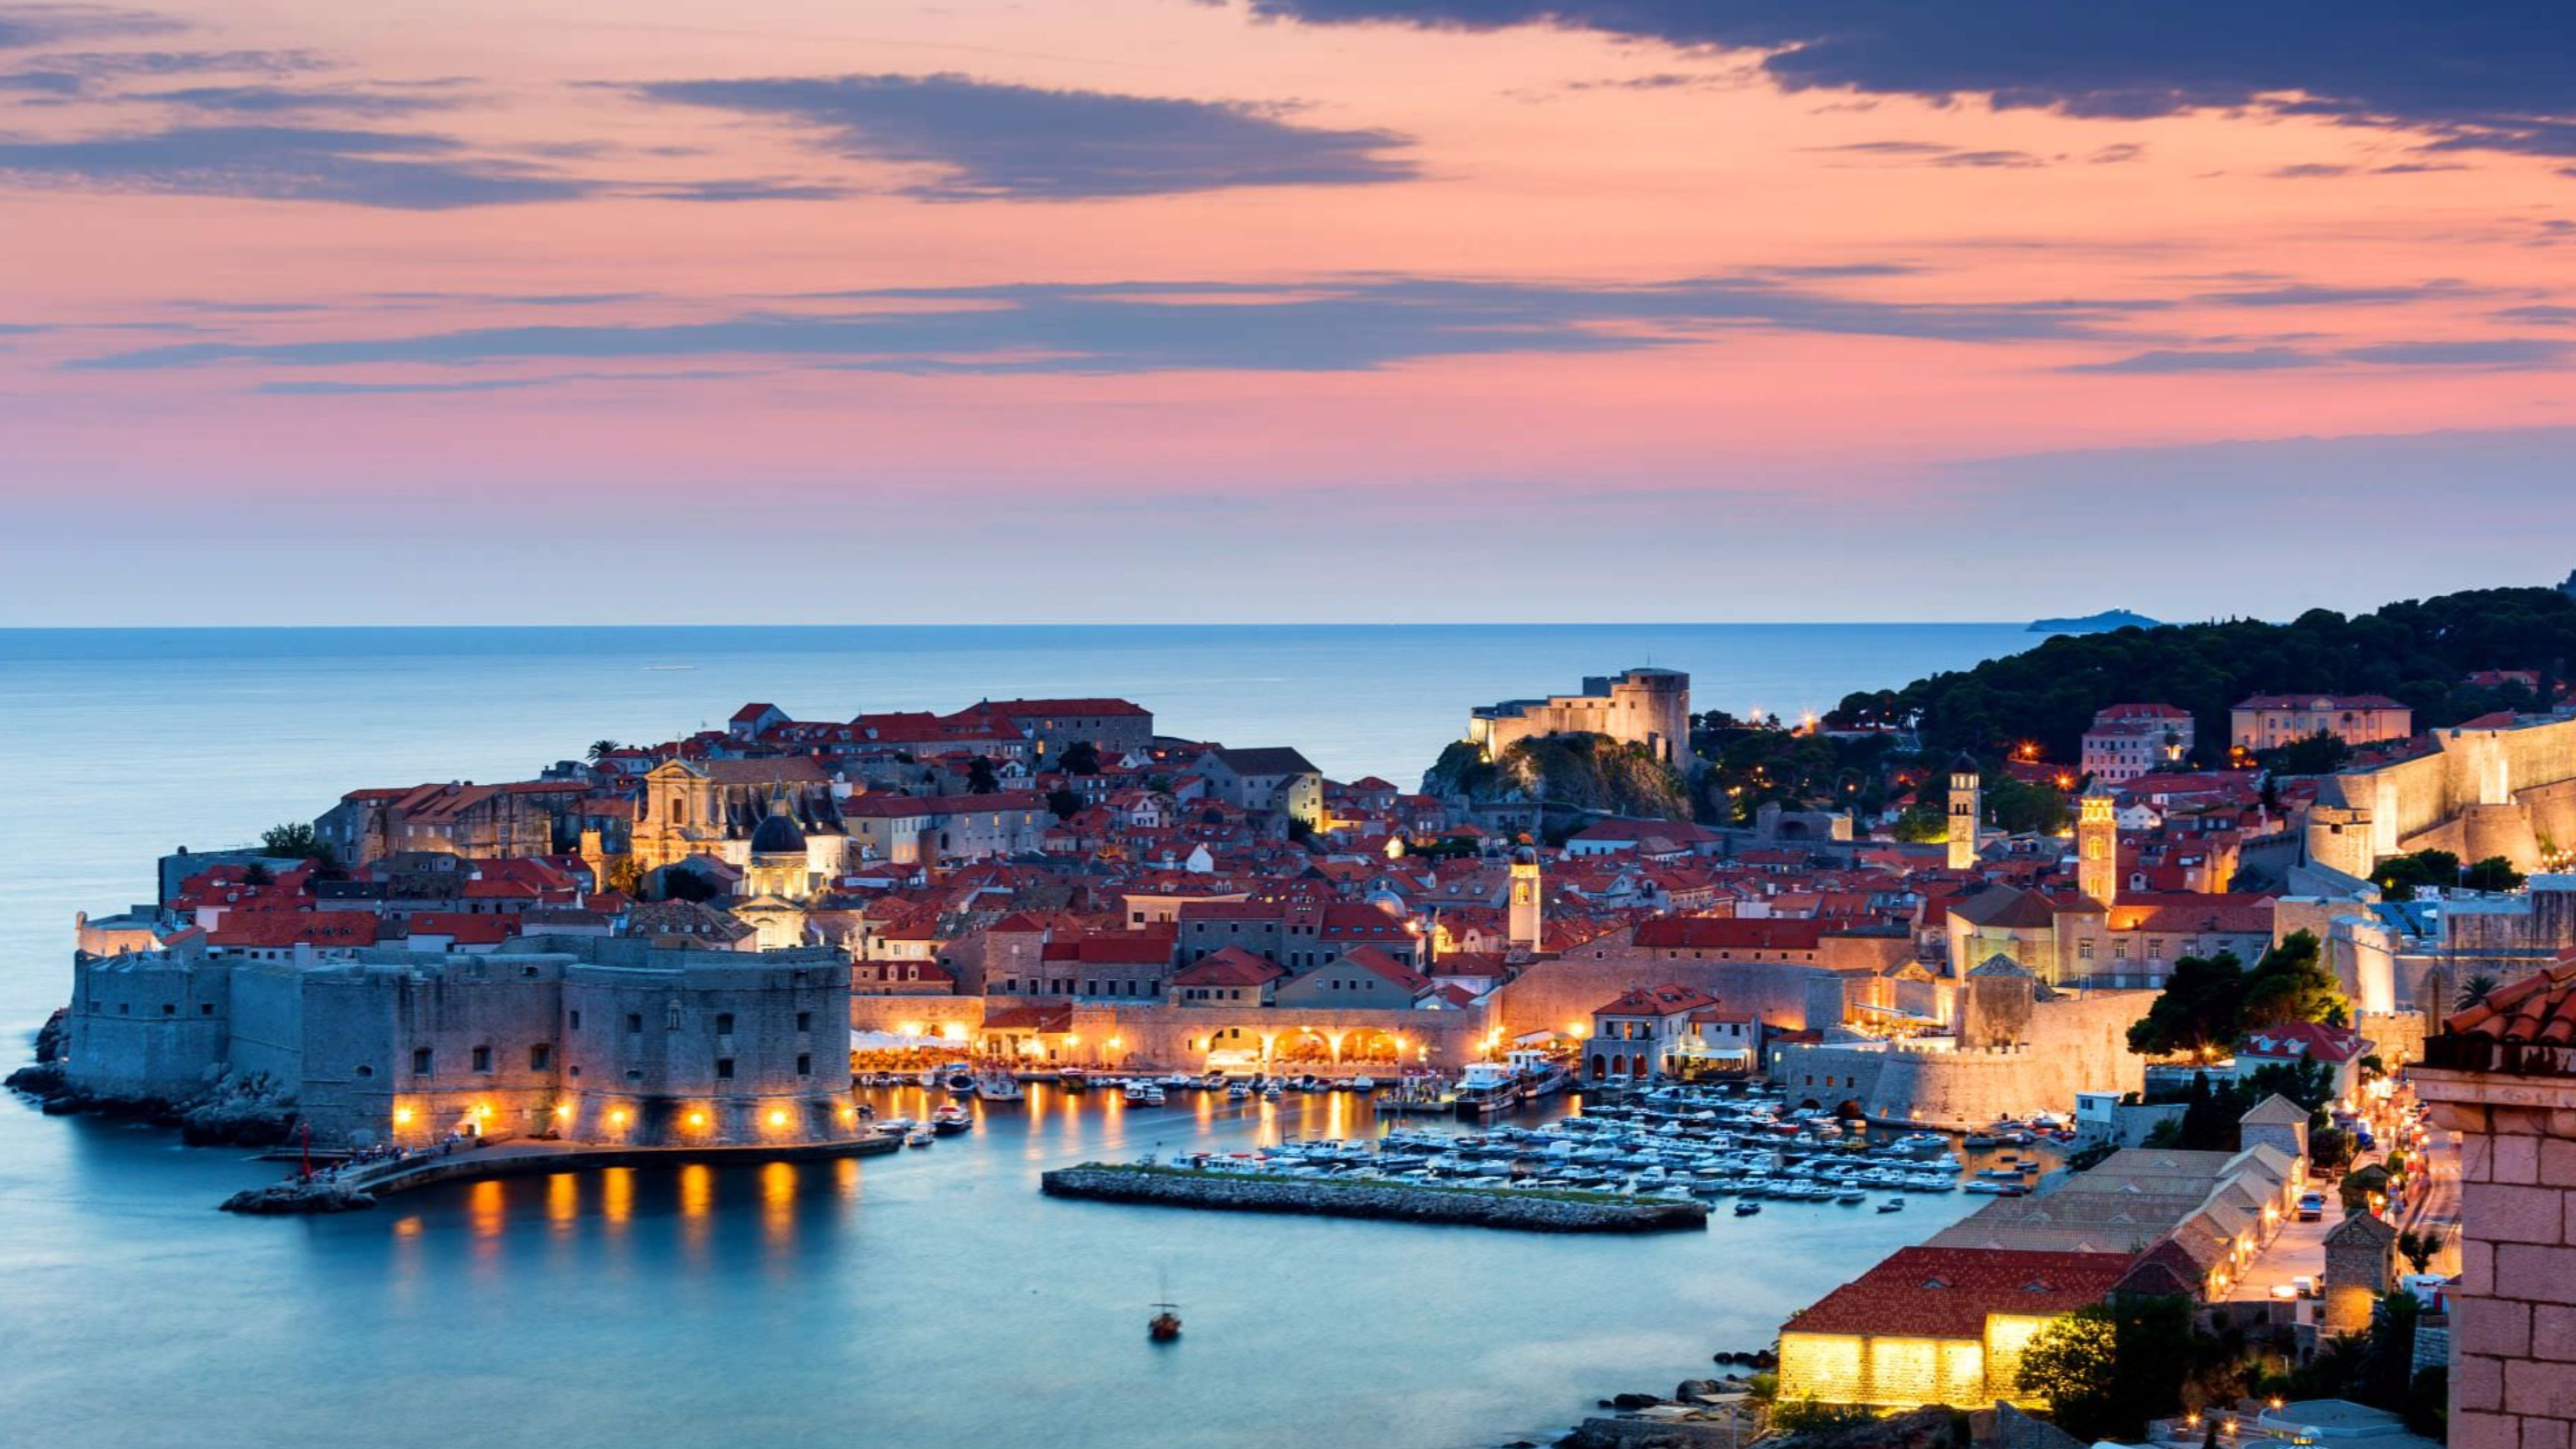 Croatia: A country at the crossroads of Central and Southeast Europe. 3840x2160 4K Wallpaper.